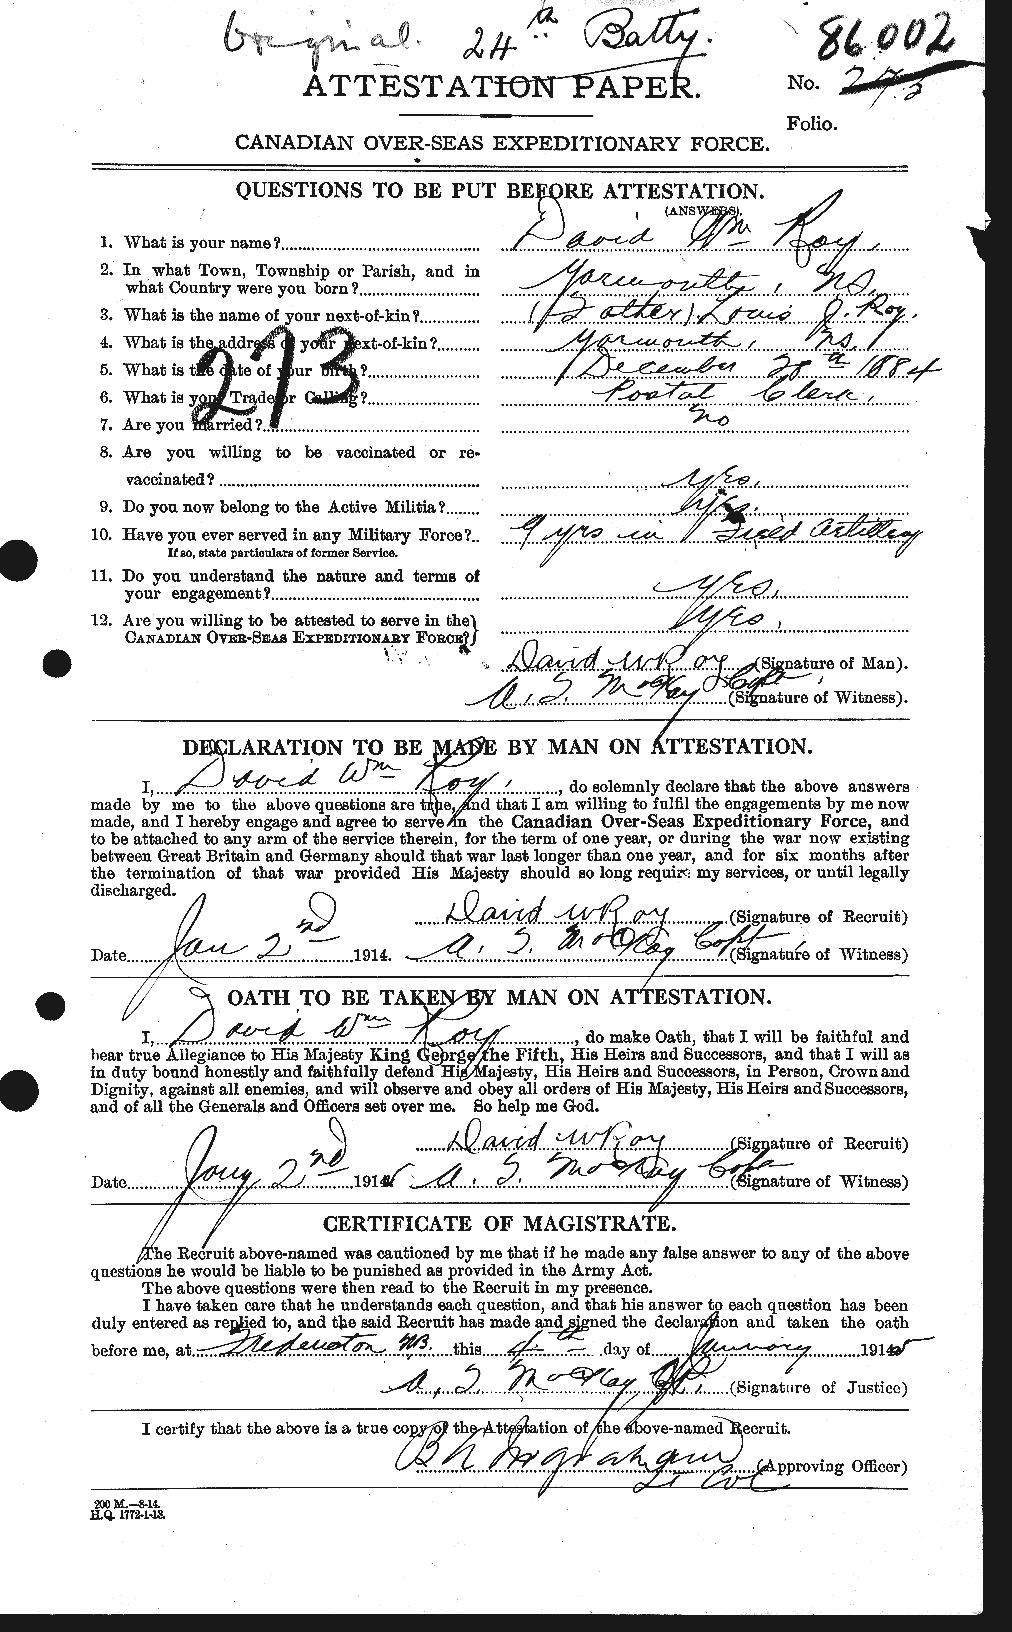 Personnel Records of the First World War - CEF 615724a